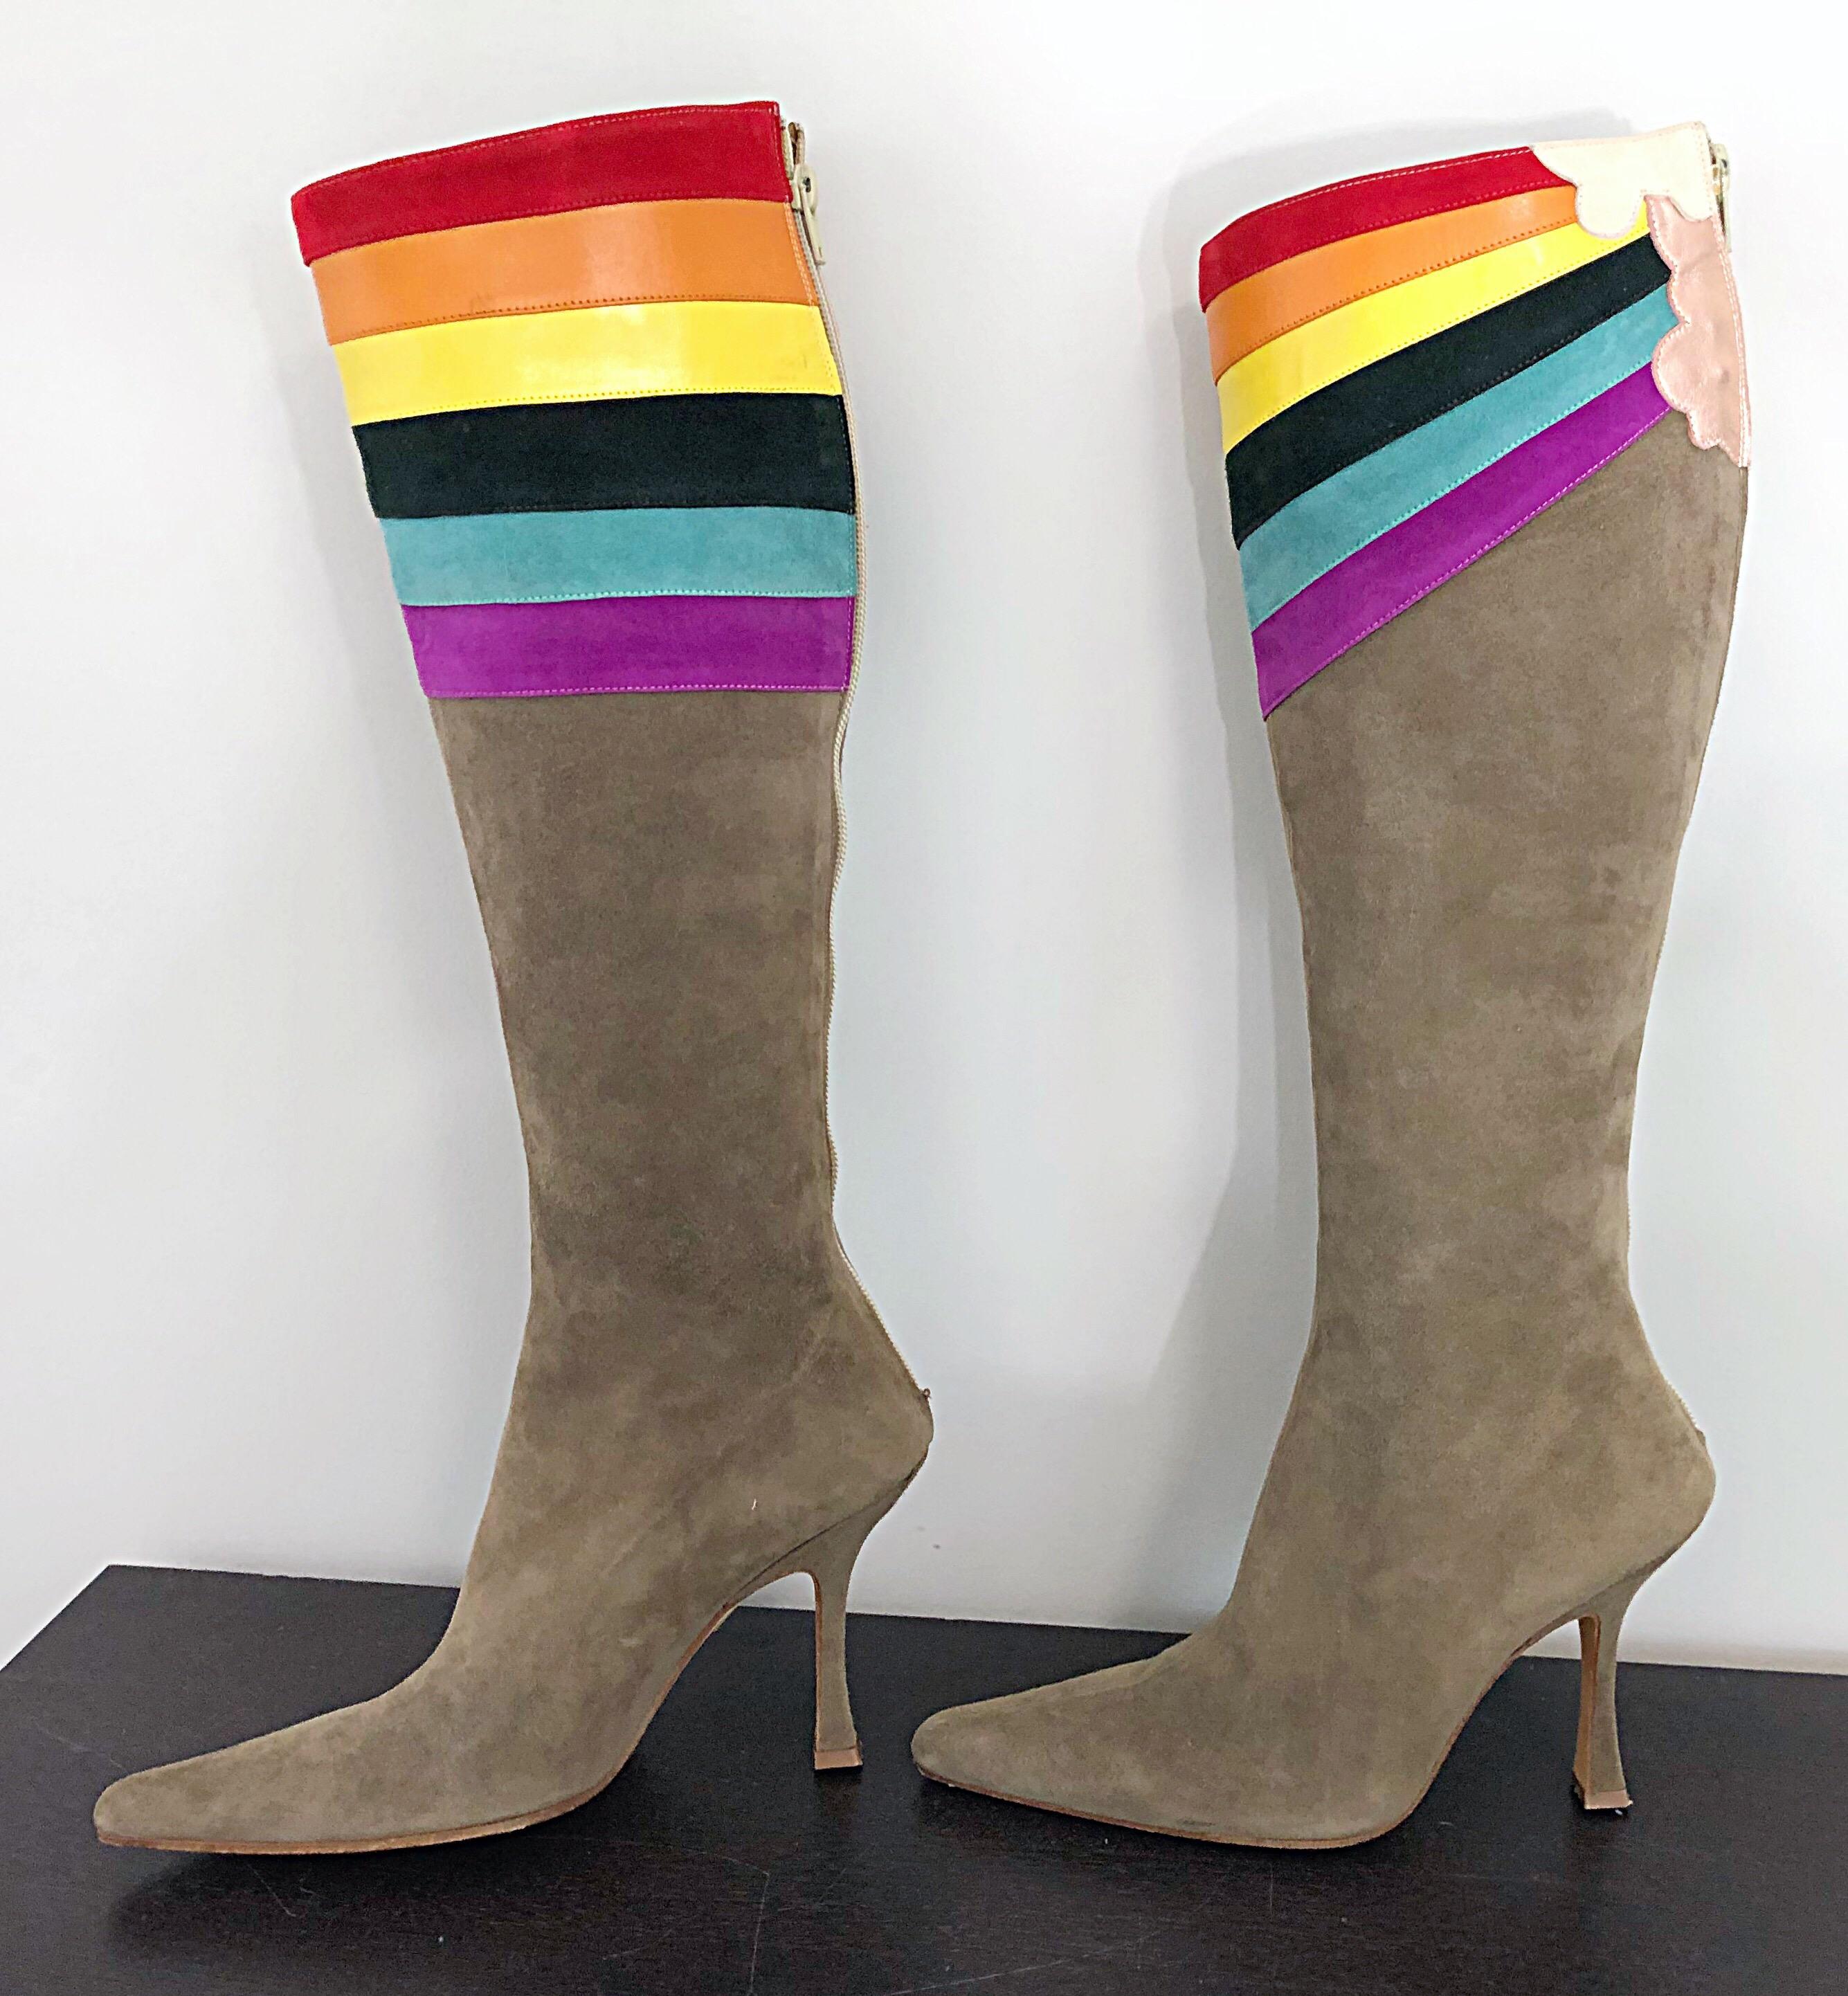 New Ashley Dearborn Size 6 / 36 Gay Pride Pegasus Rainbow High Heel Suede Boots For Sale 1